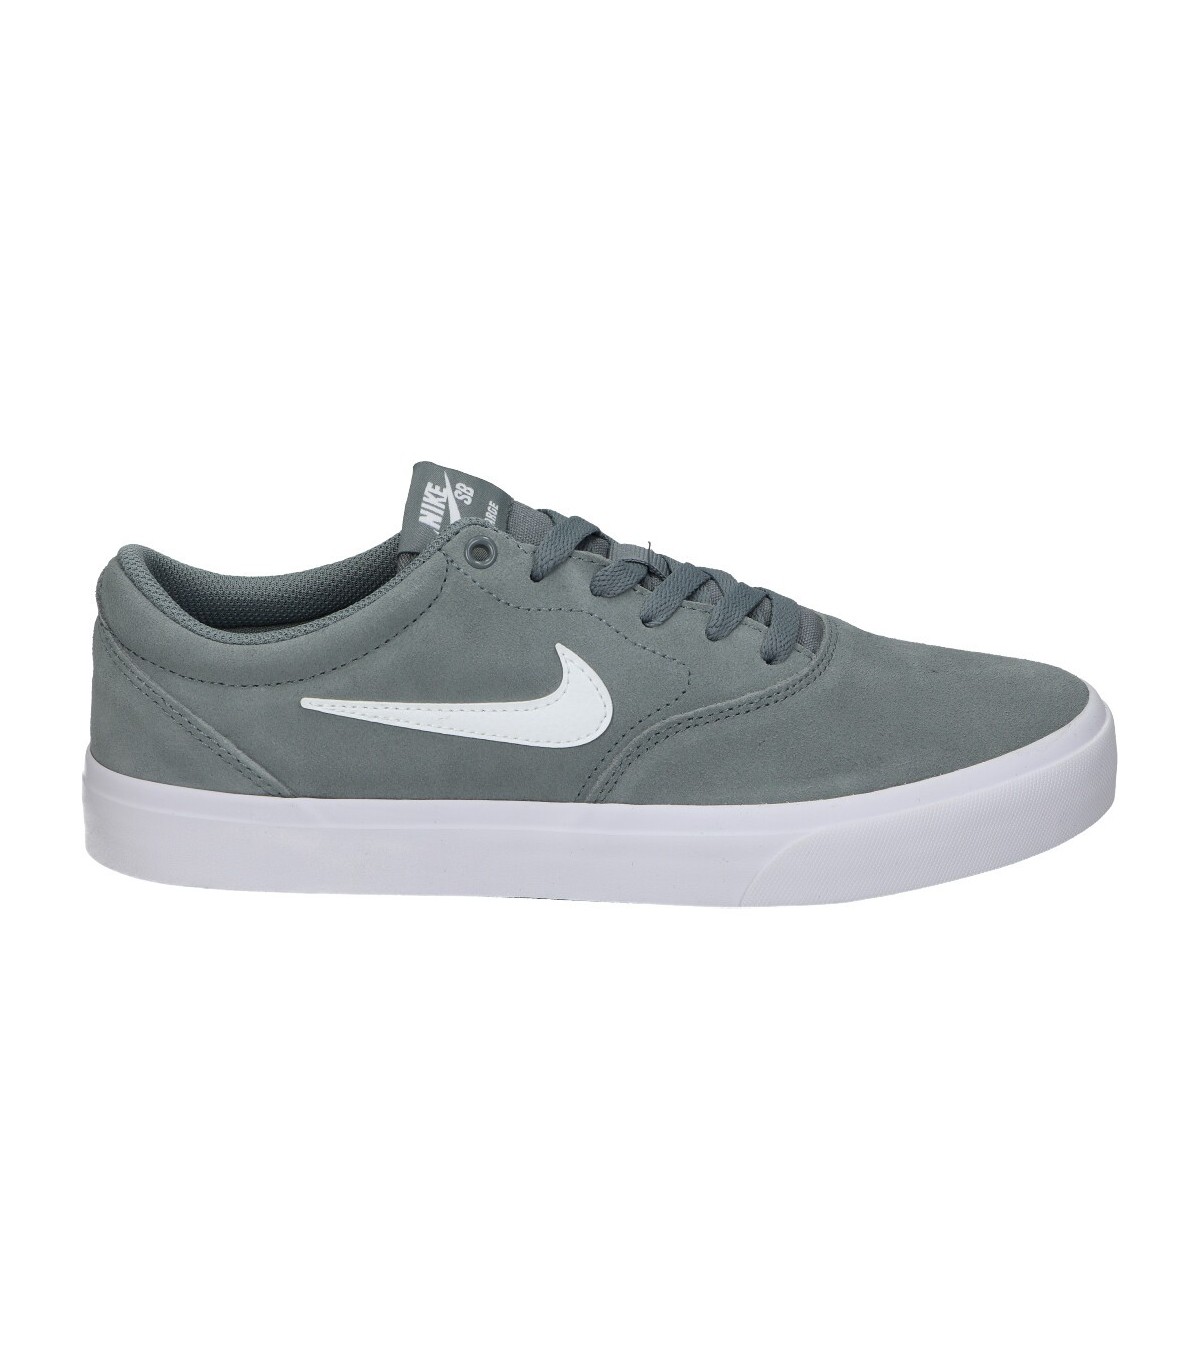 Nike SB Charge gris ct3463-006 hombre